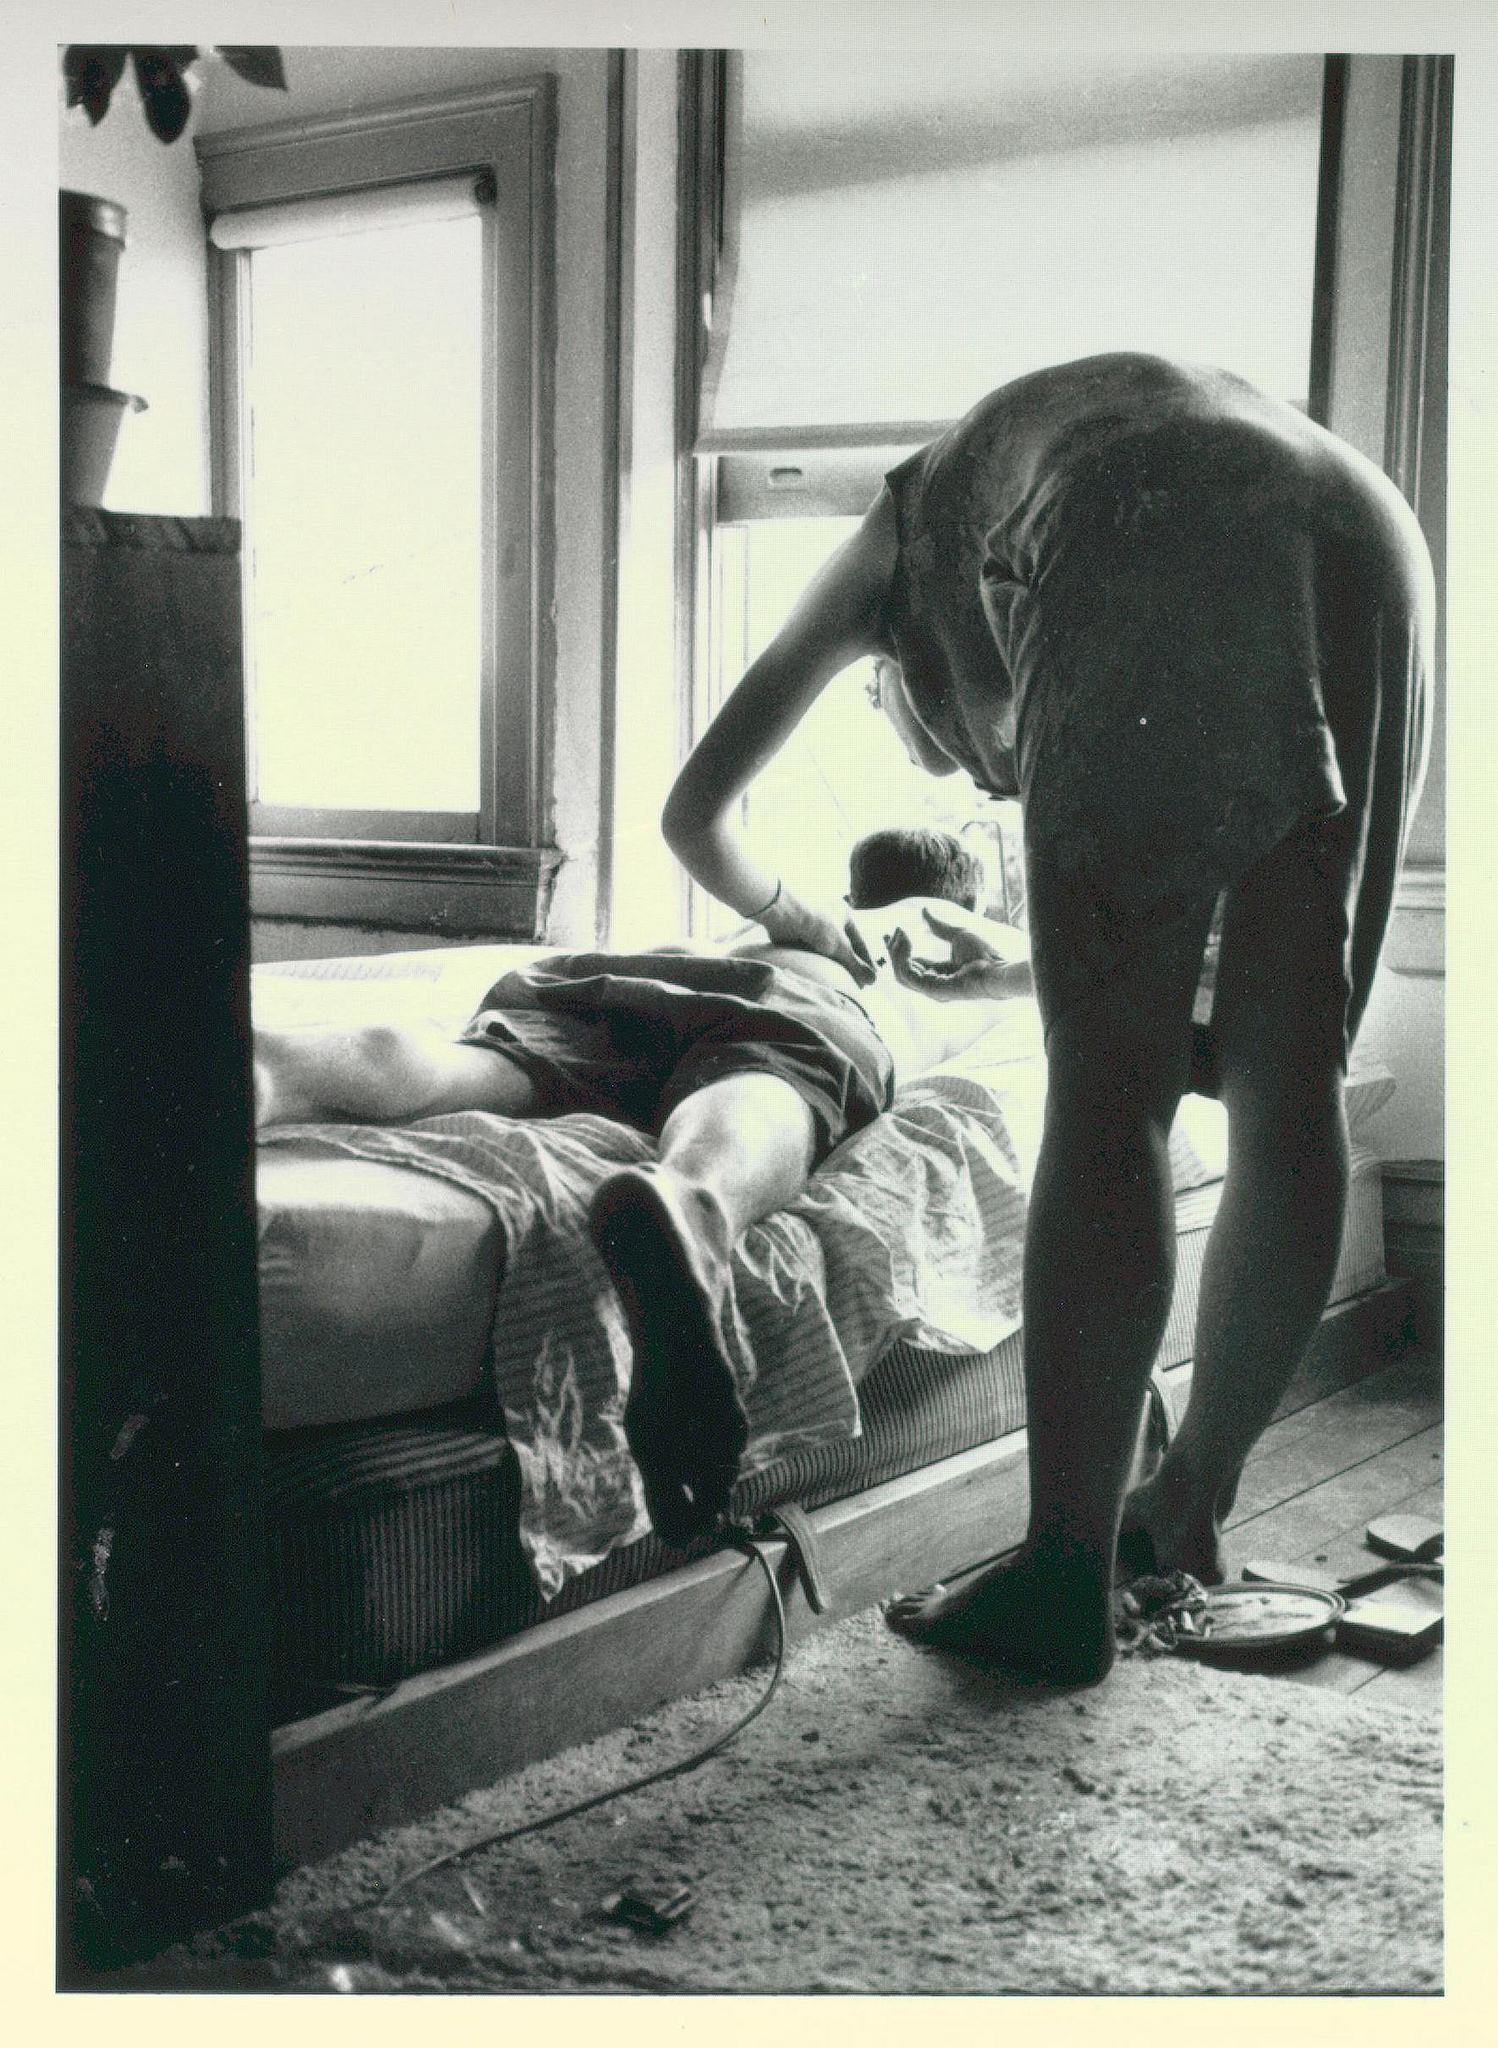 Neal Cassady in Millbrook getting psychedelic injection vertical, 1964